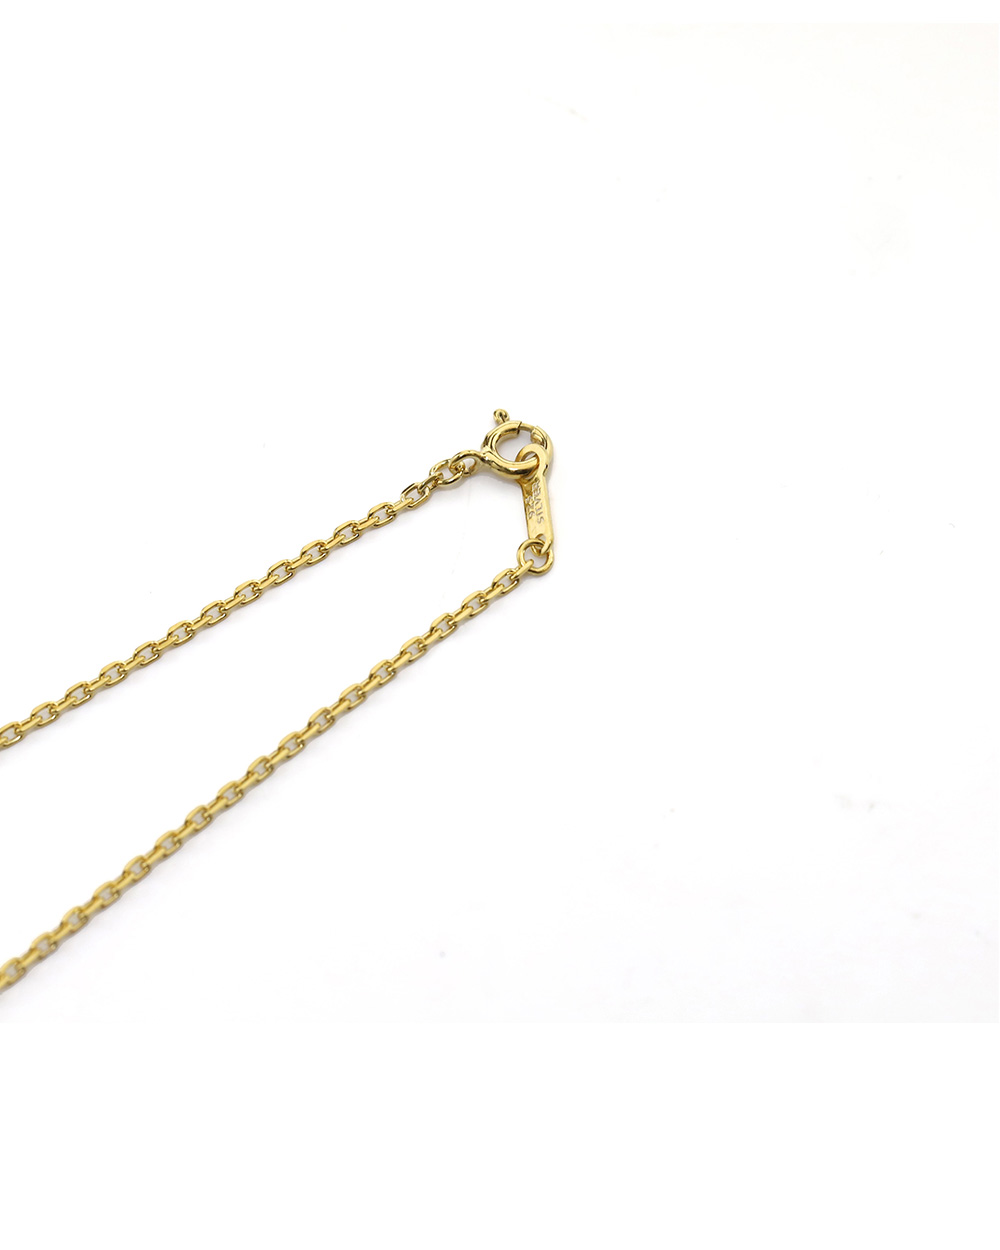 PEACE NECKLACE GOLD 詳細画像 Gold 9